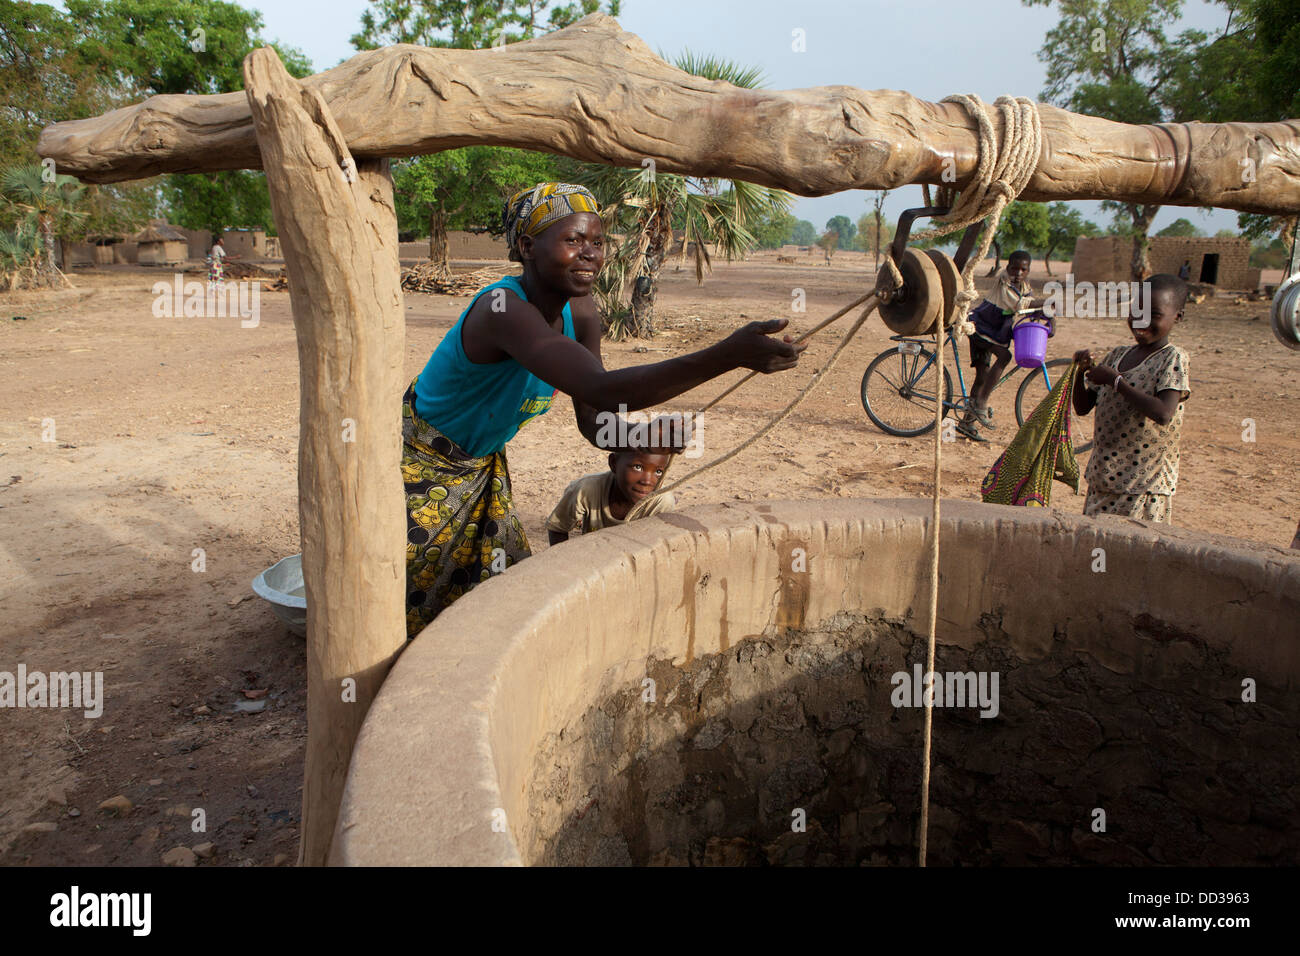 Water well in Dédougou province, Burkina Faso, West Africa. Stock Photo